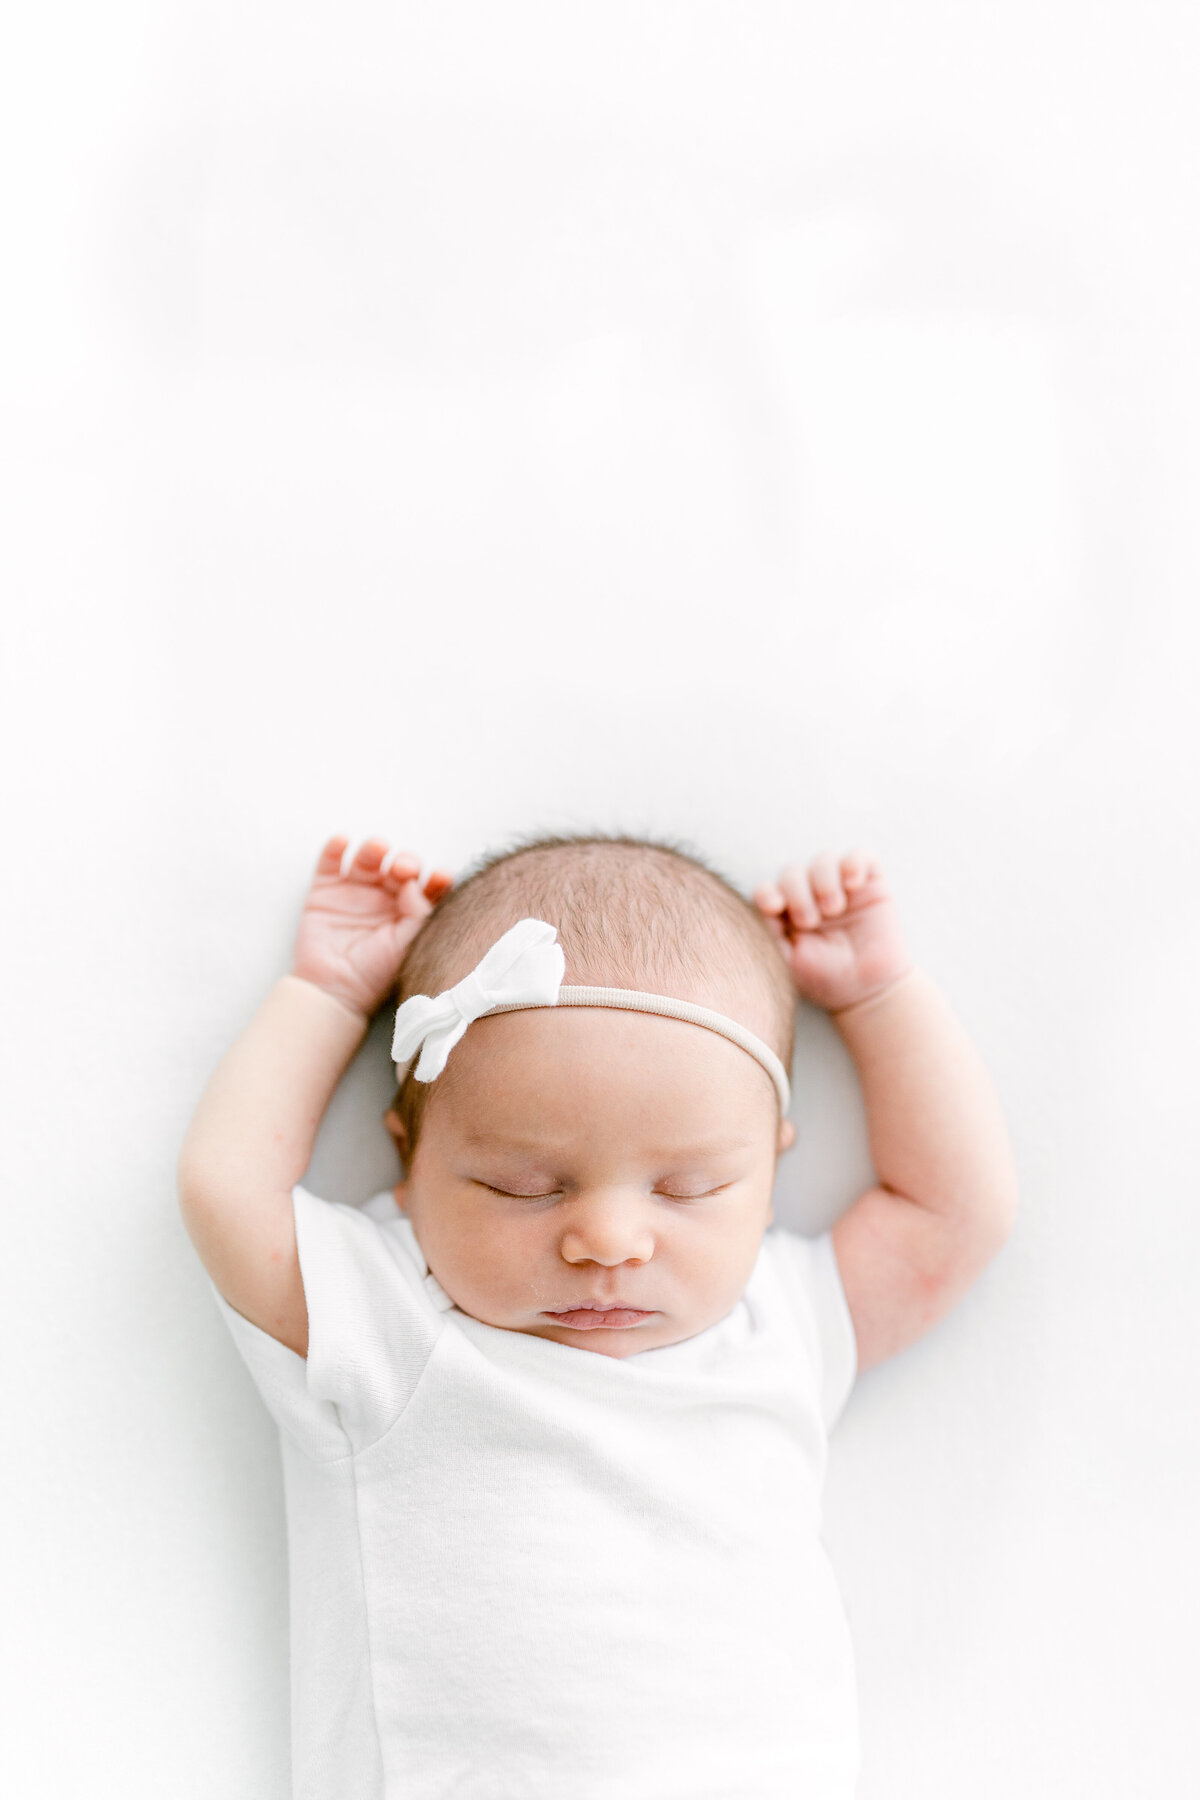 Headshot of a newborn baby against an all-white blanket with their arms up above their head and eyes closed